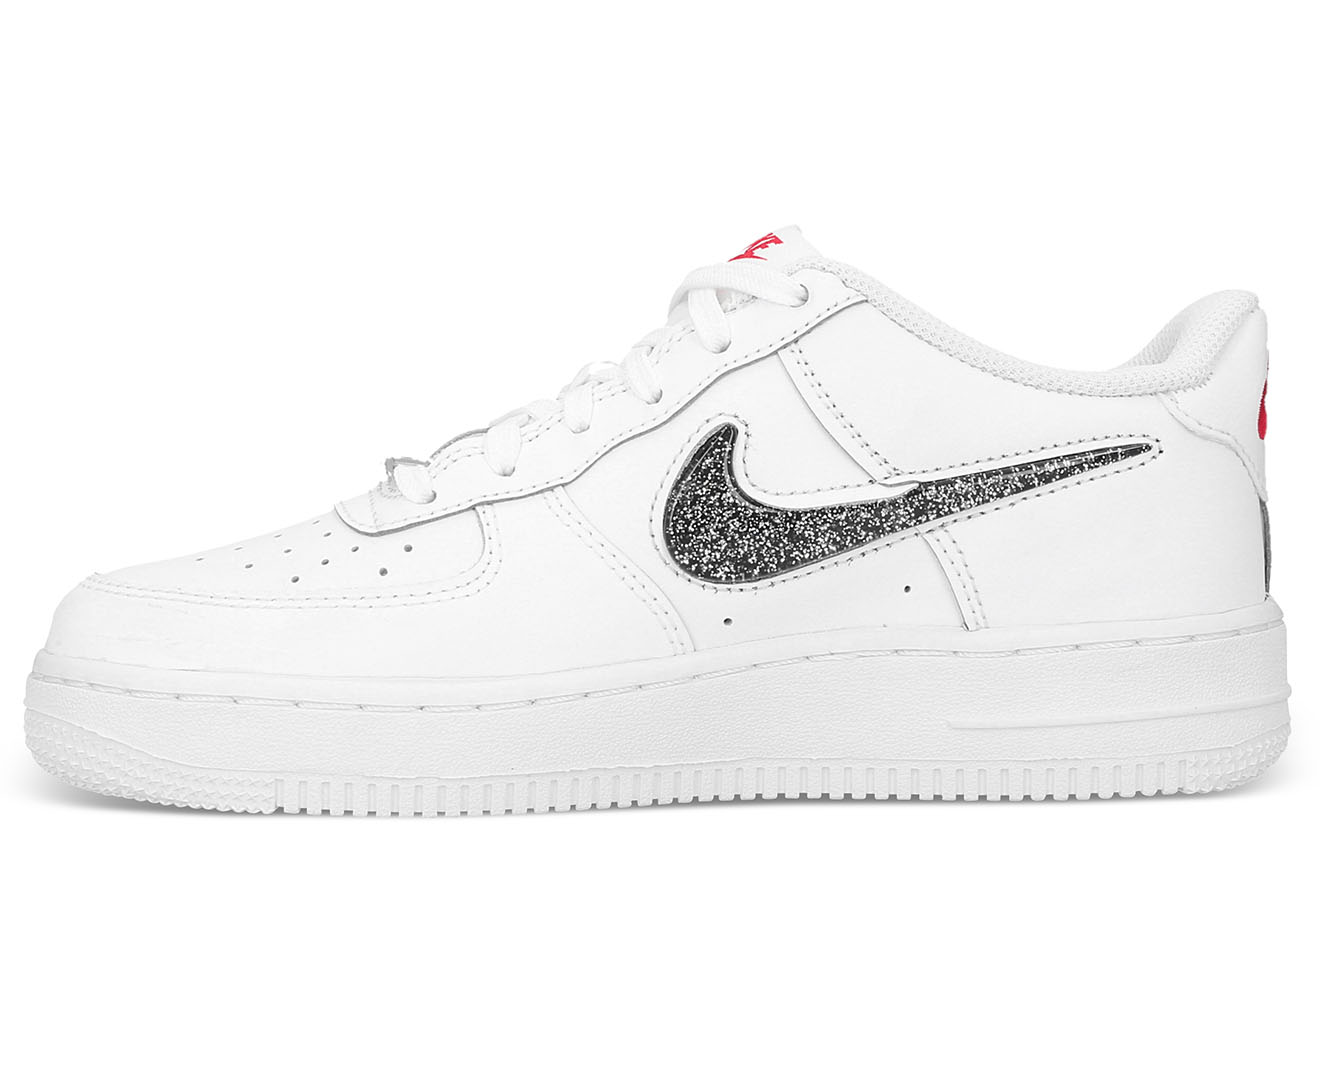 Nike - Air Force 1 LV8 - CN8535100 - Color: White - Size: 5.5 Big